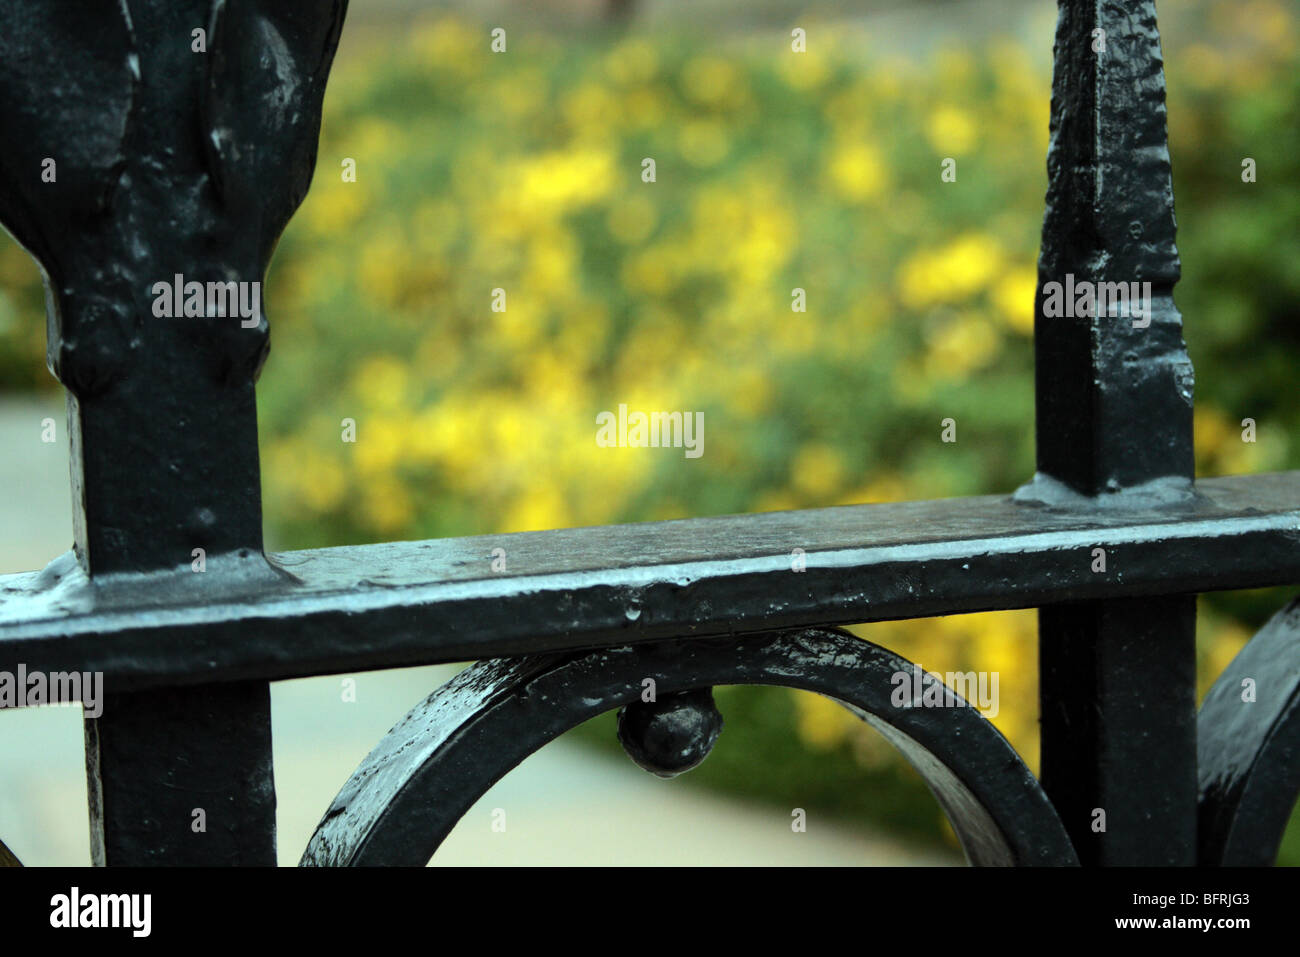 Iron gate railing with flowers in the background Stock Photo